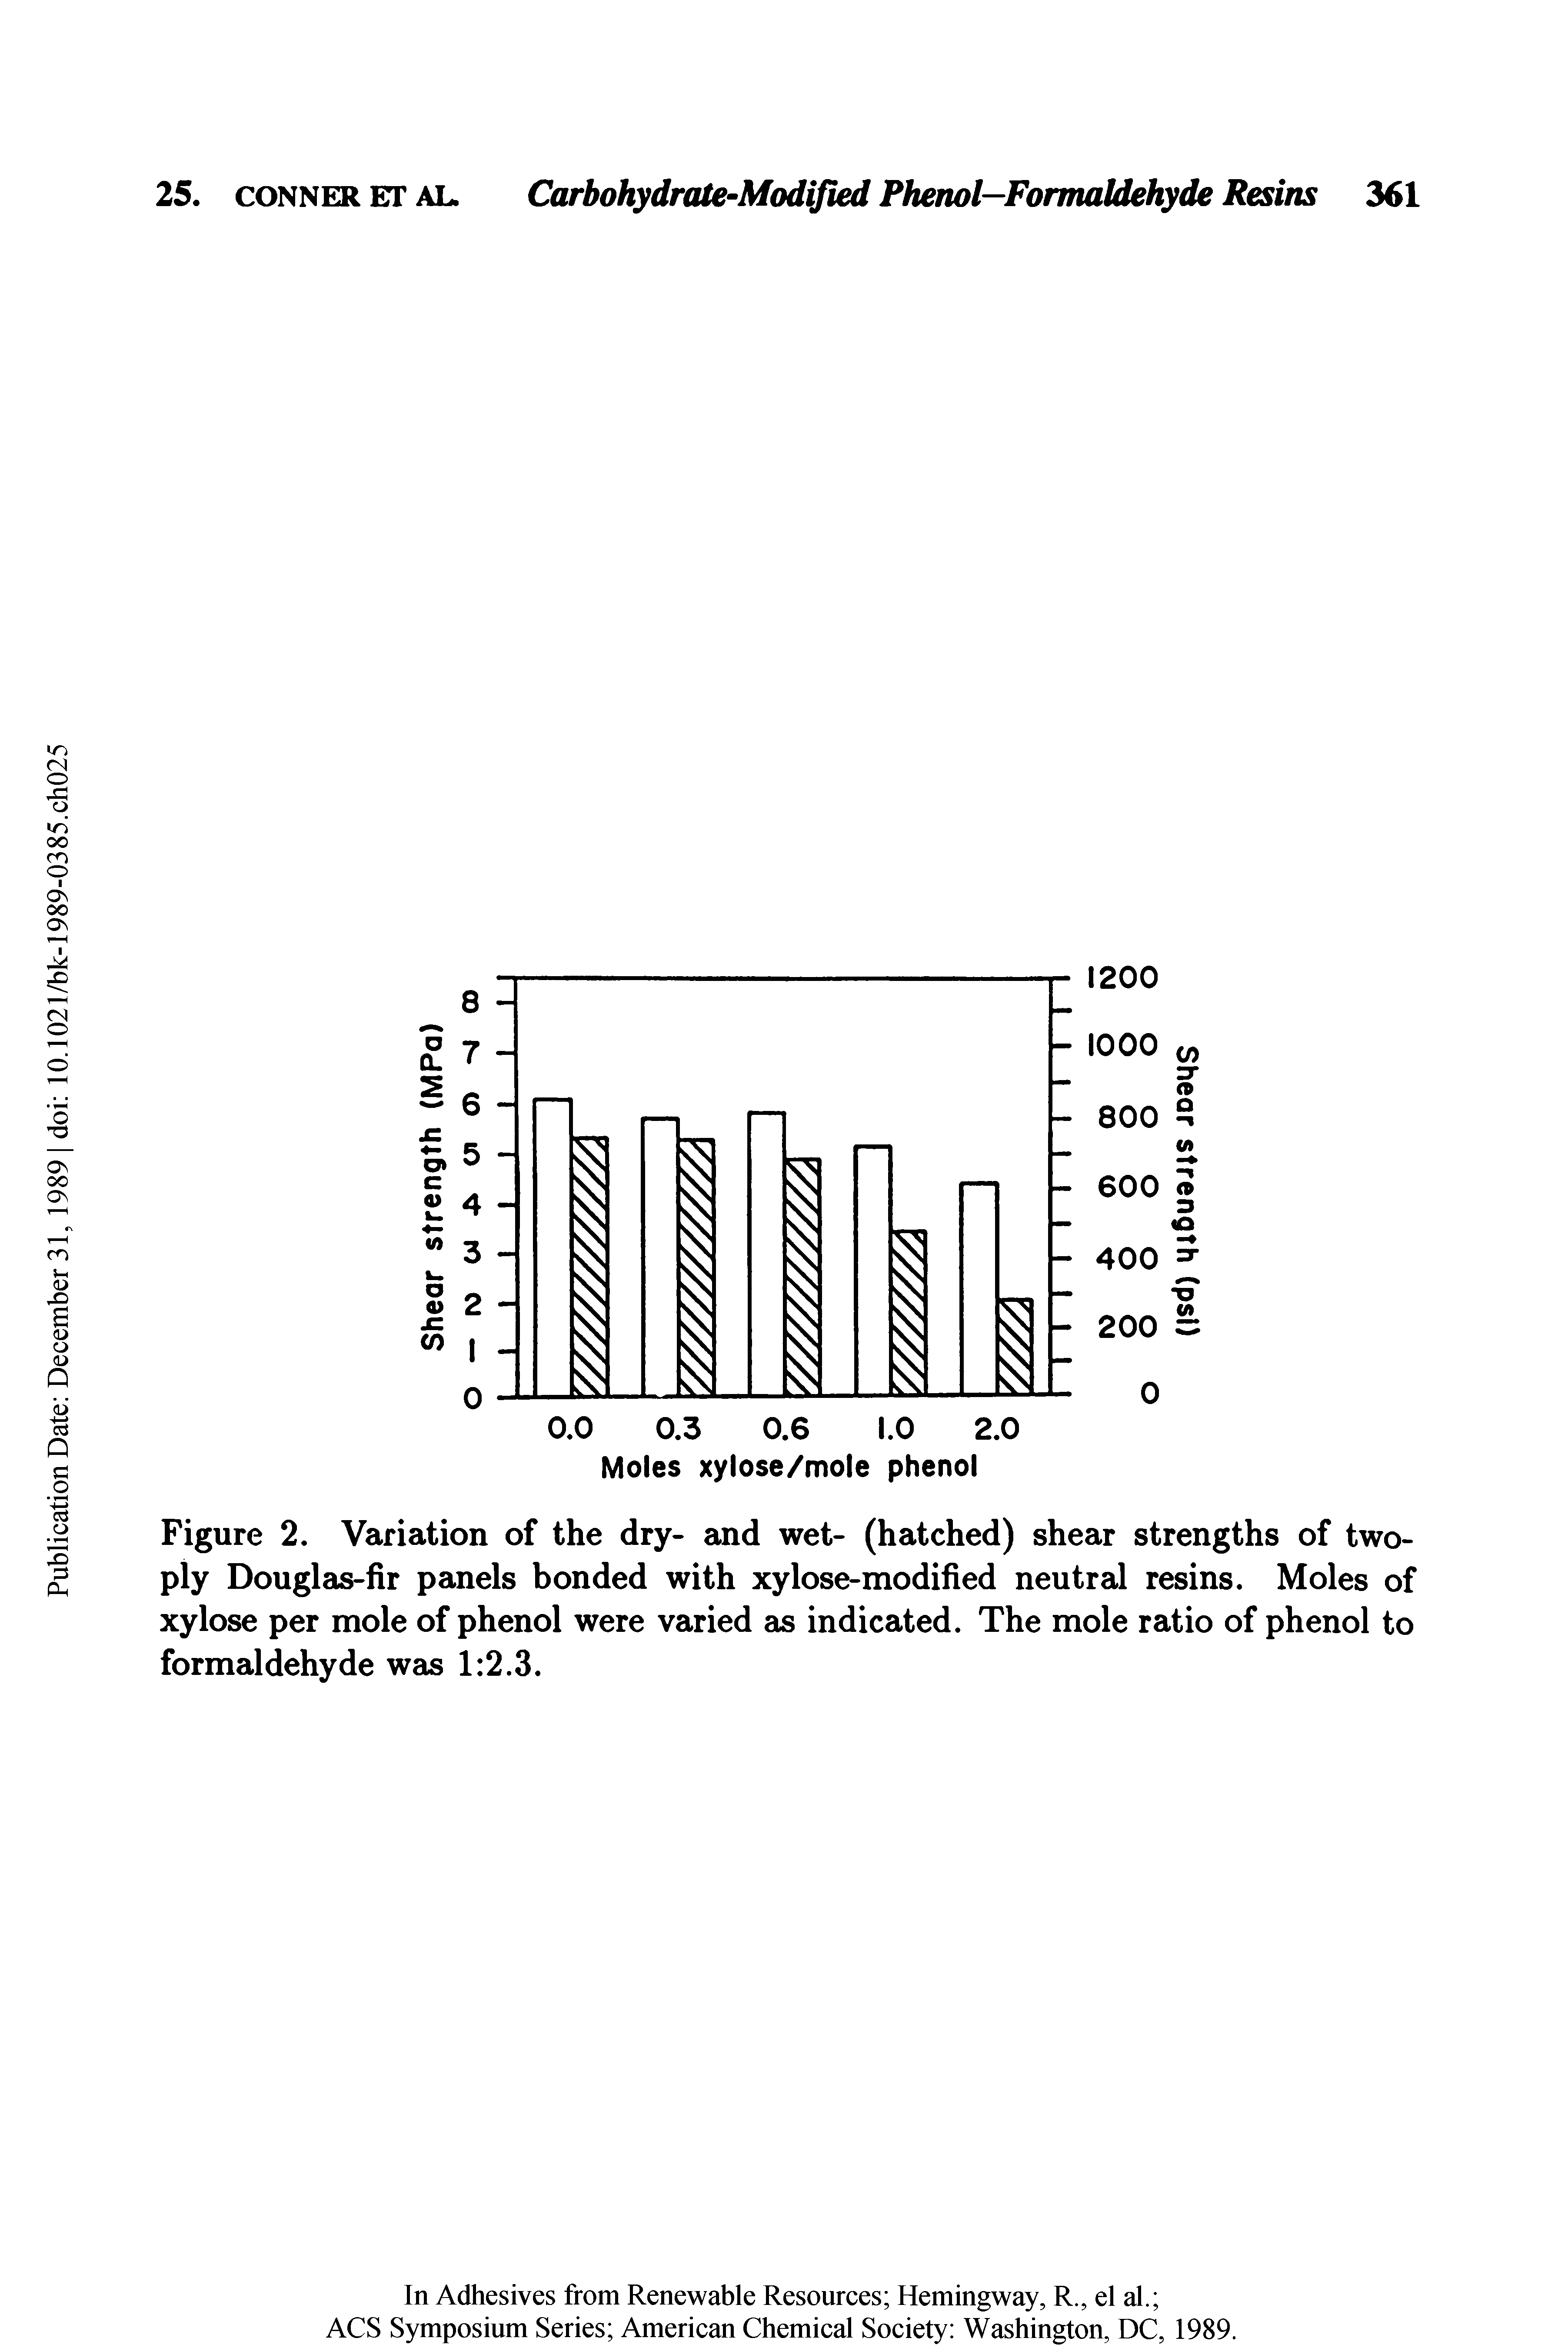 Figure 2. Variation of the dry- and wet- (hatched) shear strengths of two-ply Douglas-fir panels bonded with xylose-modified neutral resins. Moles of xylose per mole of phenol were varied as indicated. The mole ratio of phenol to formaldehyde was 1 2.3.